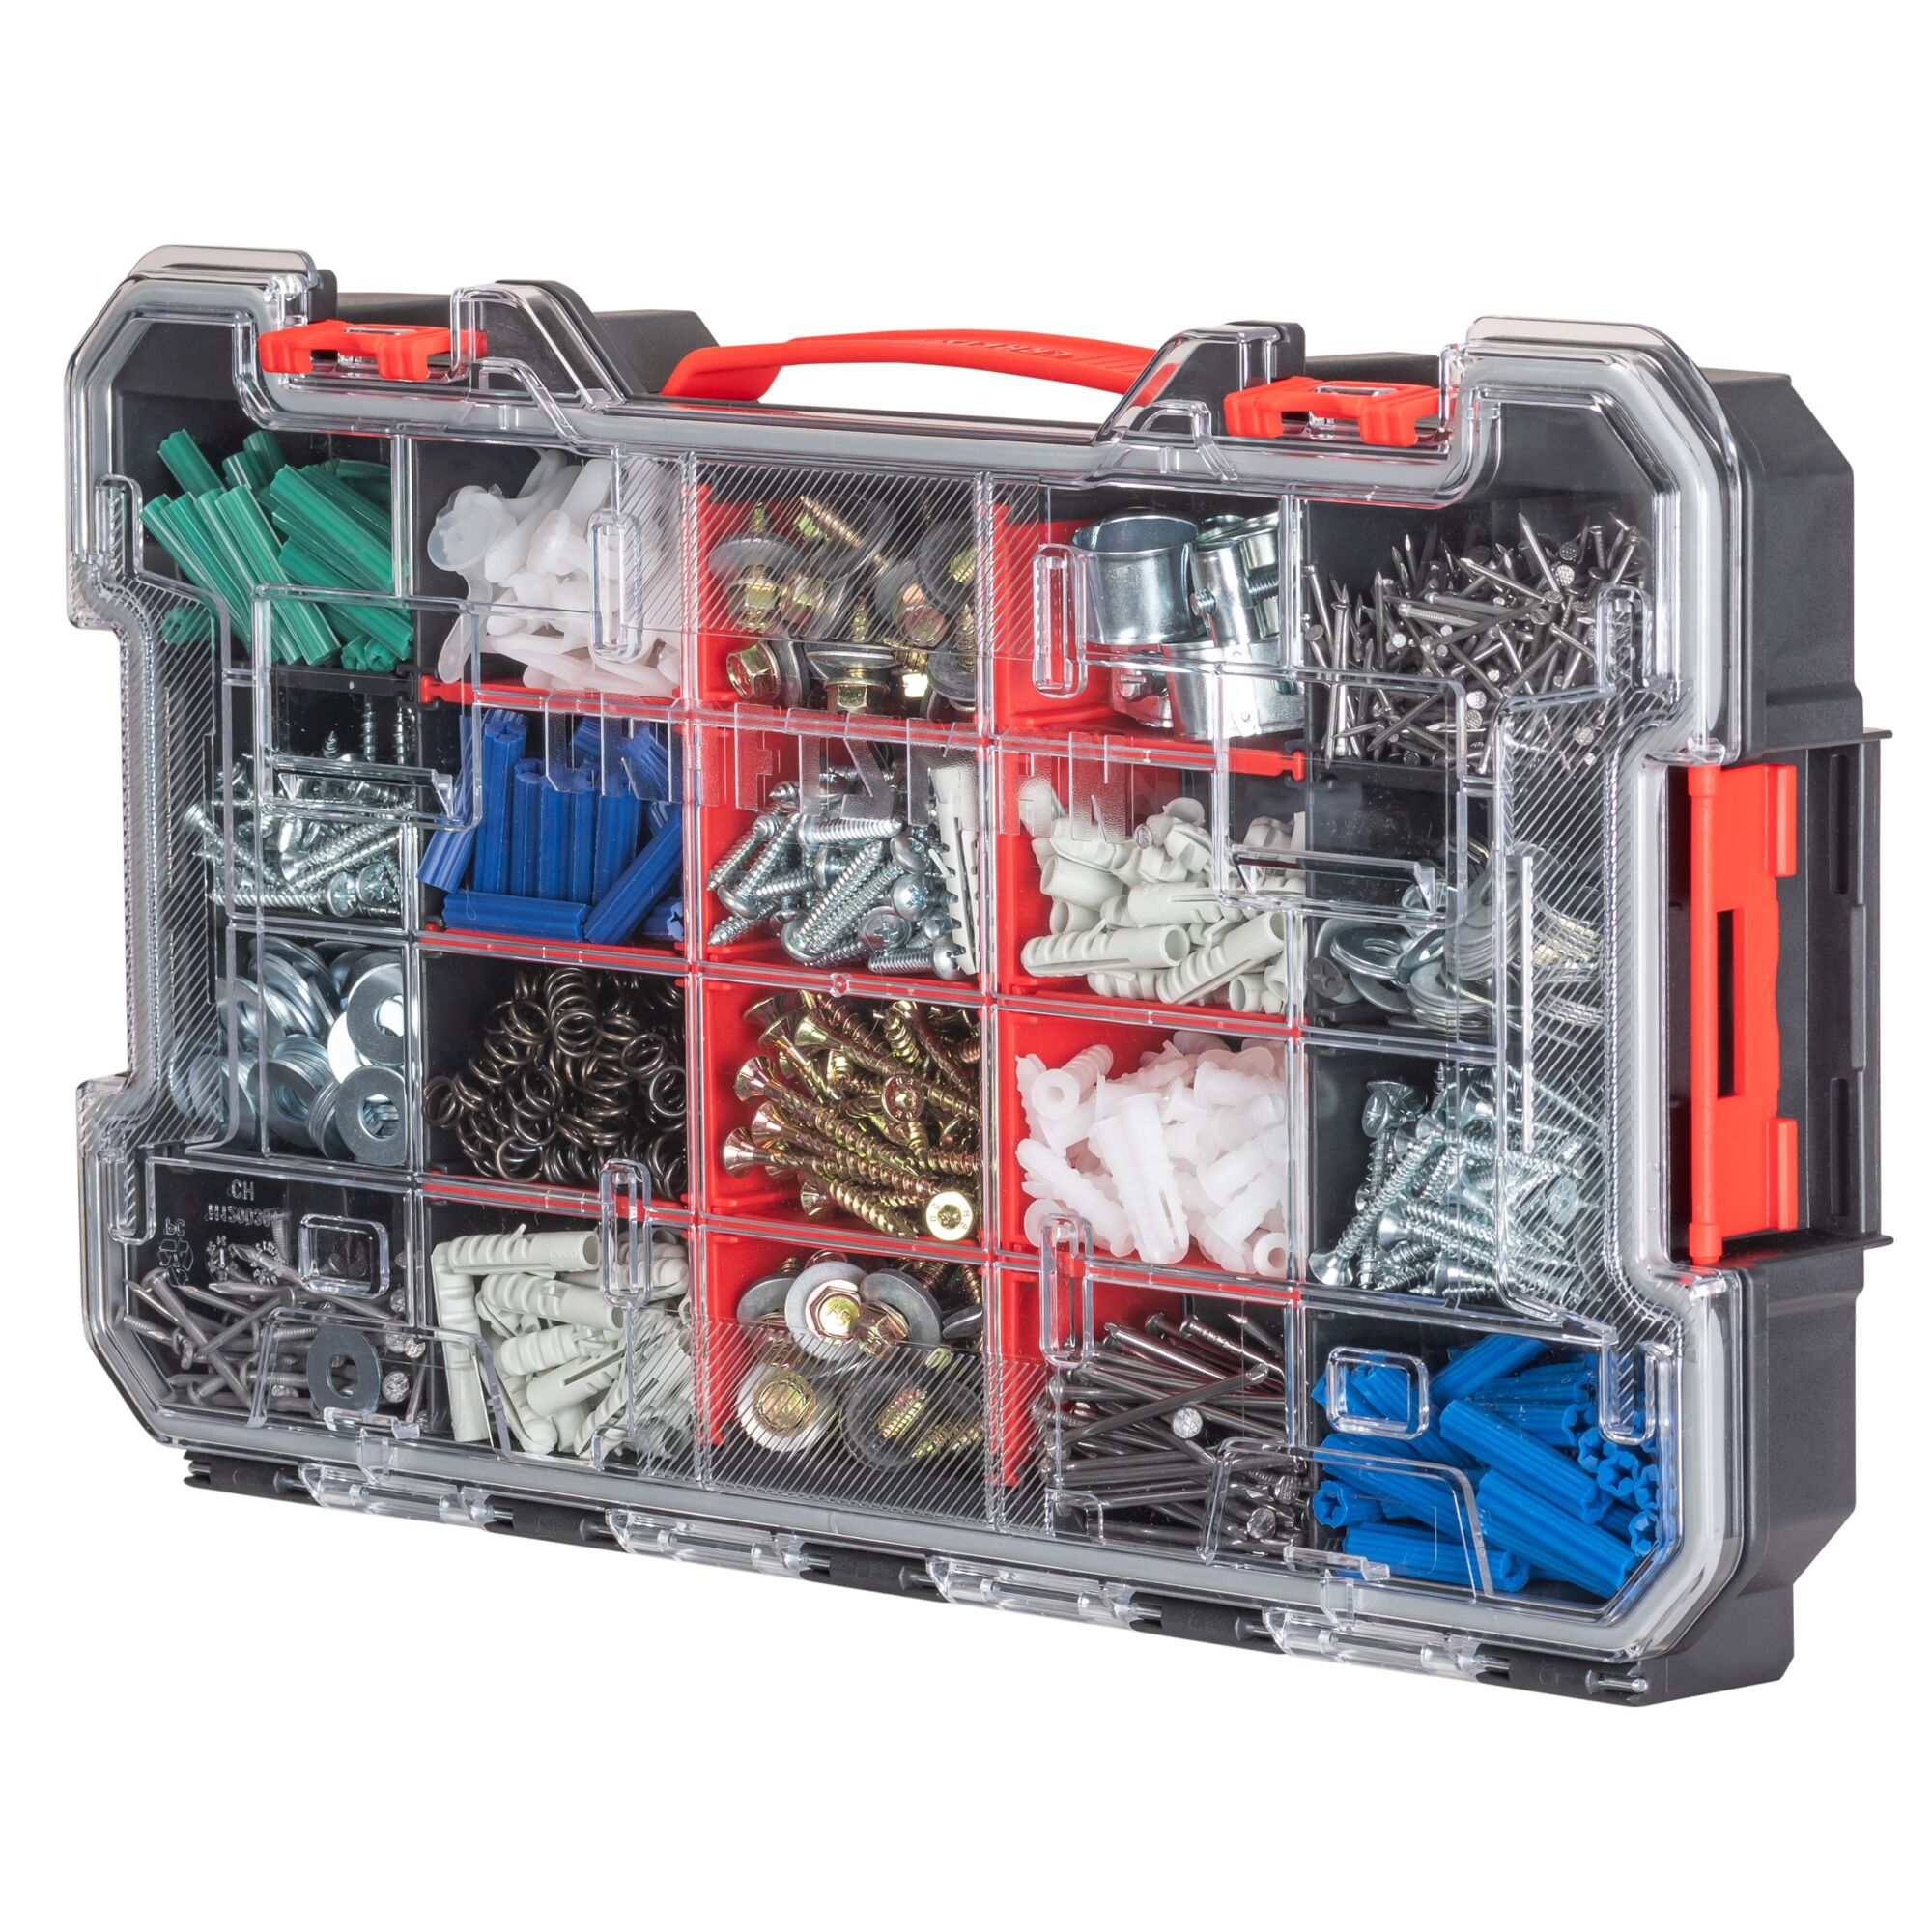 Craftsman VersaStack 20-Compartment Organizer placed up on its side to show front and that inside is filled with different tools in the different compartments 